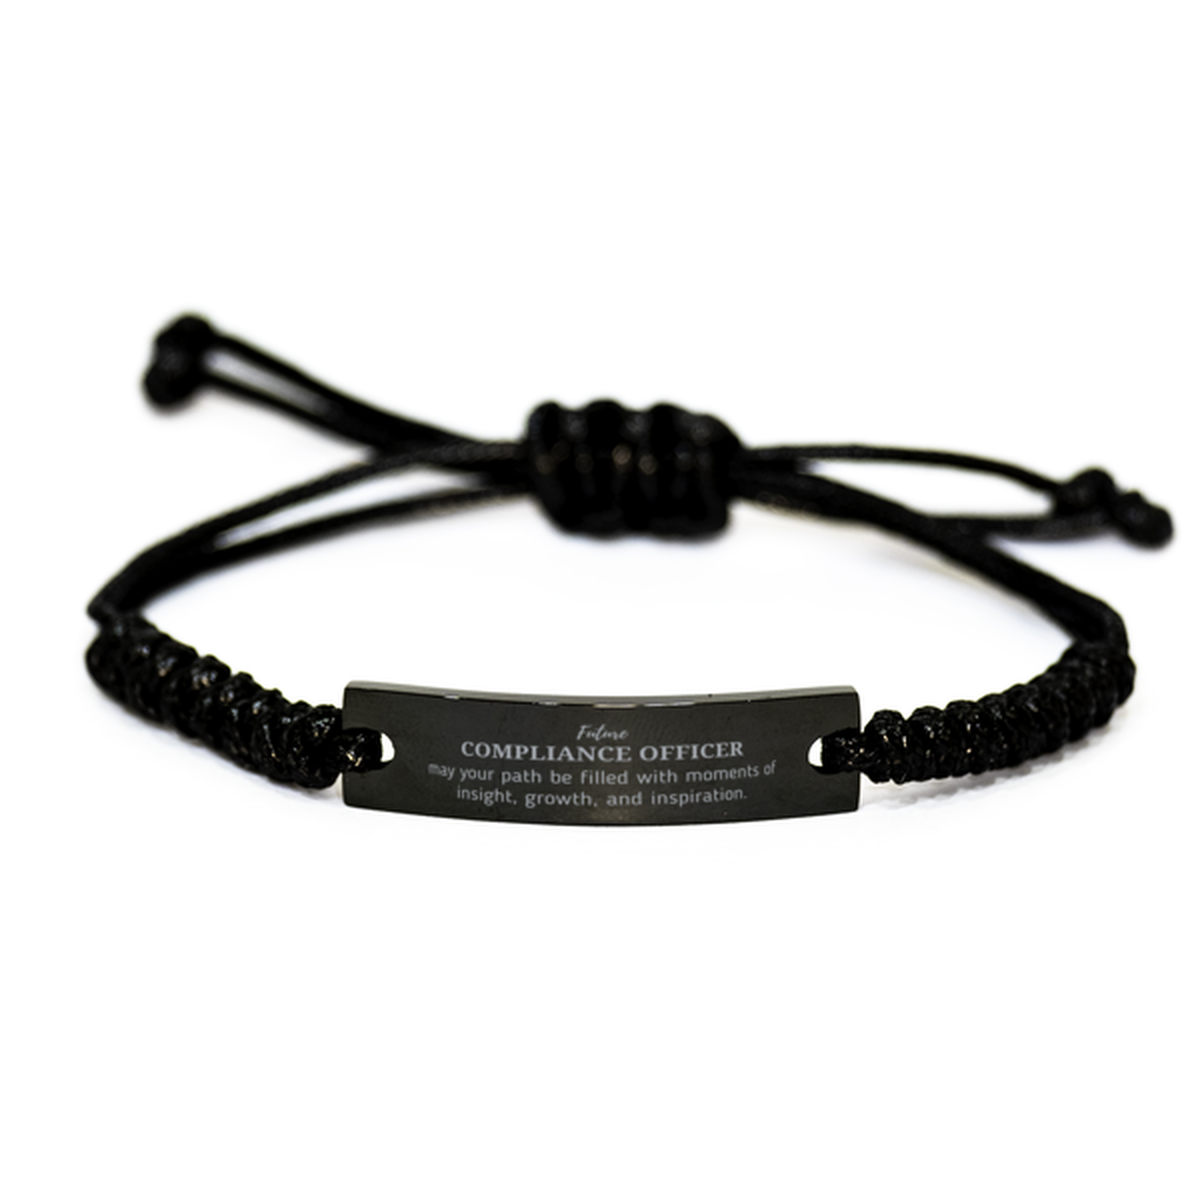 Future Compliance Officer Gifts, May your path be filled with moments of insight, Graduation Gifts for New Compliance Officer, Christmas Unique Black Rope Bracelet For Men, Women, Friends